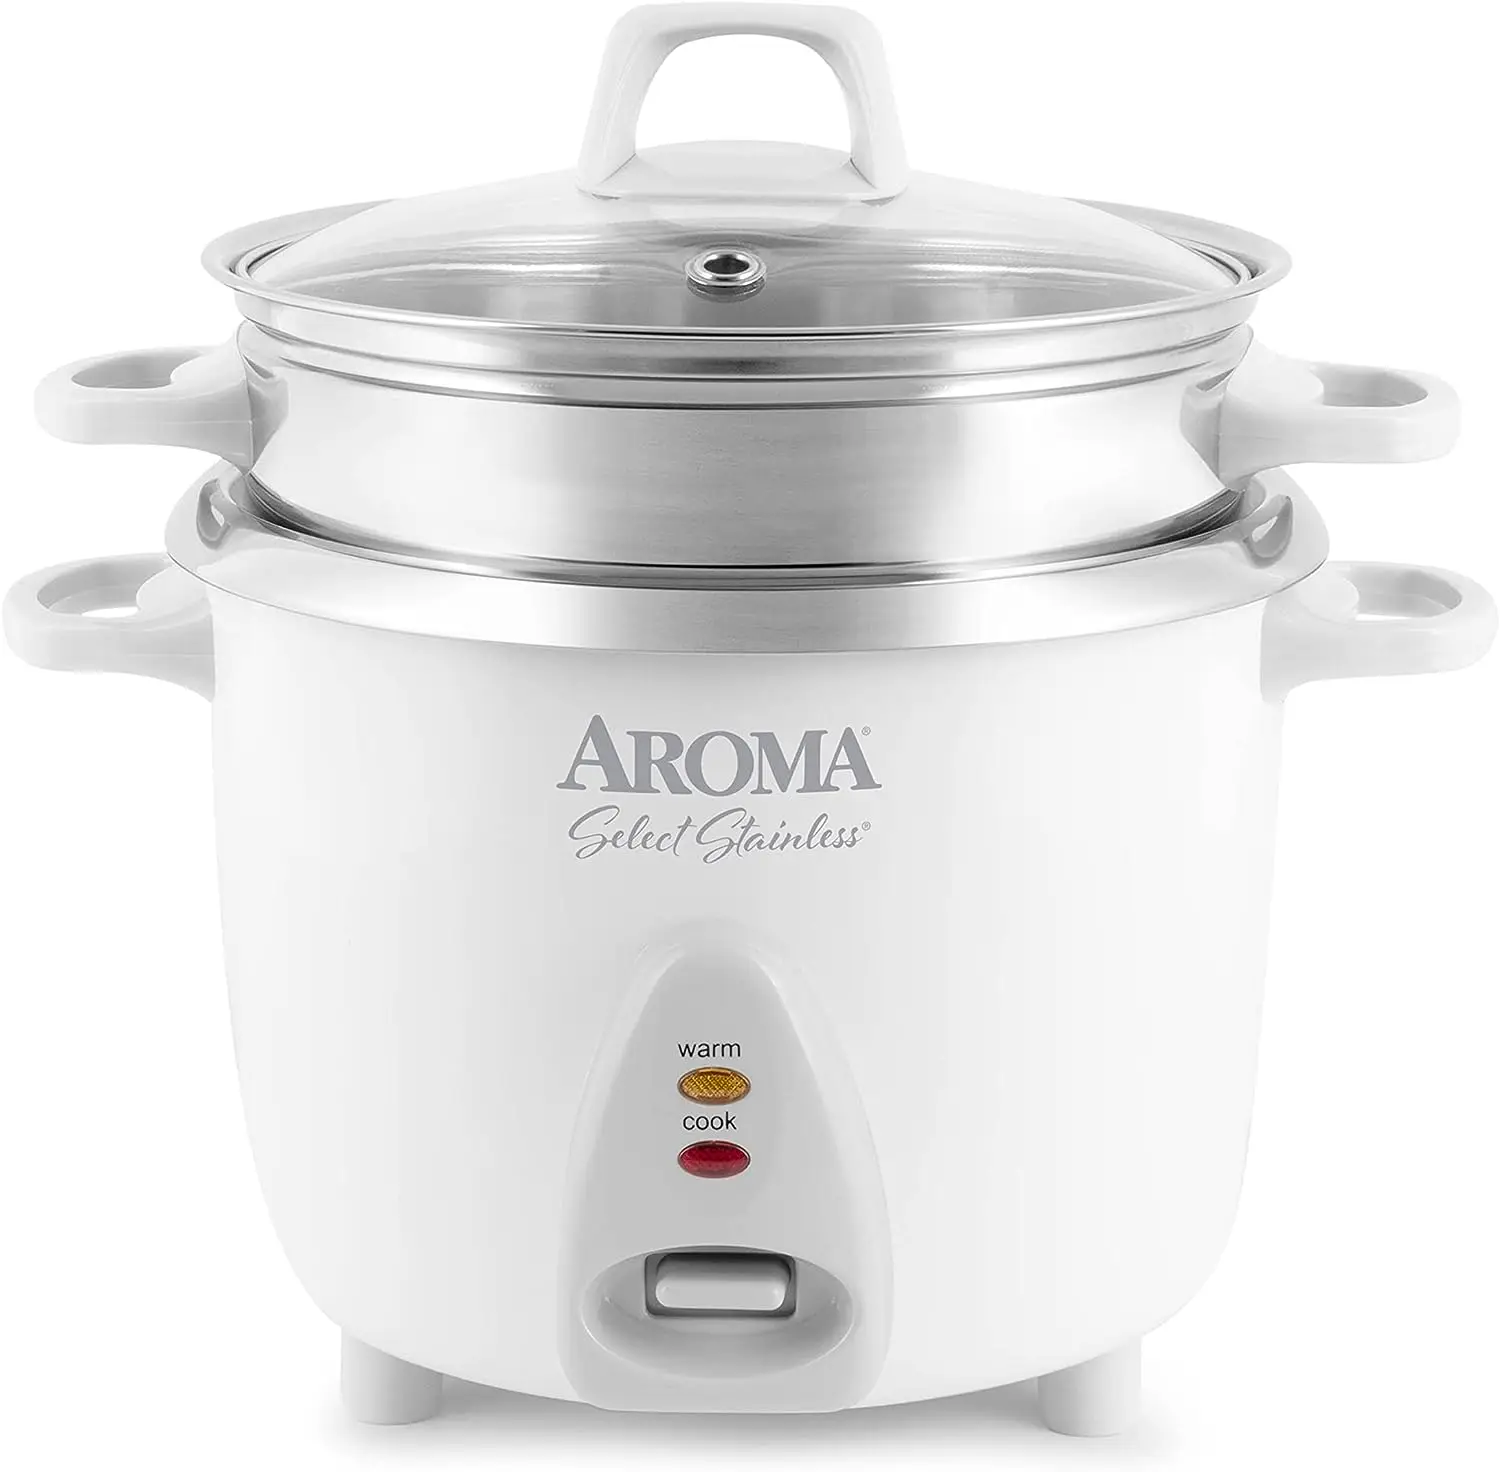 

14-Cup (Cooked) / 3Qt. Select Stainless Pot-Style Rice Cooker, & Food Steamer, One-Touch Operation, Automatic Keep Warm Mode